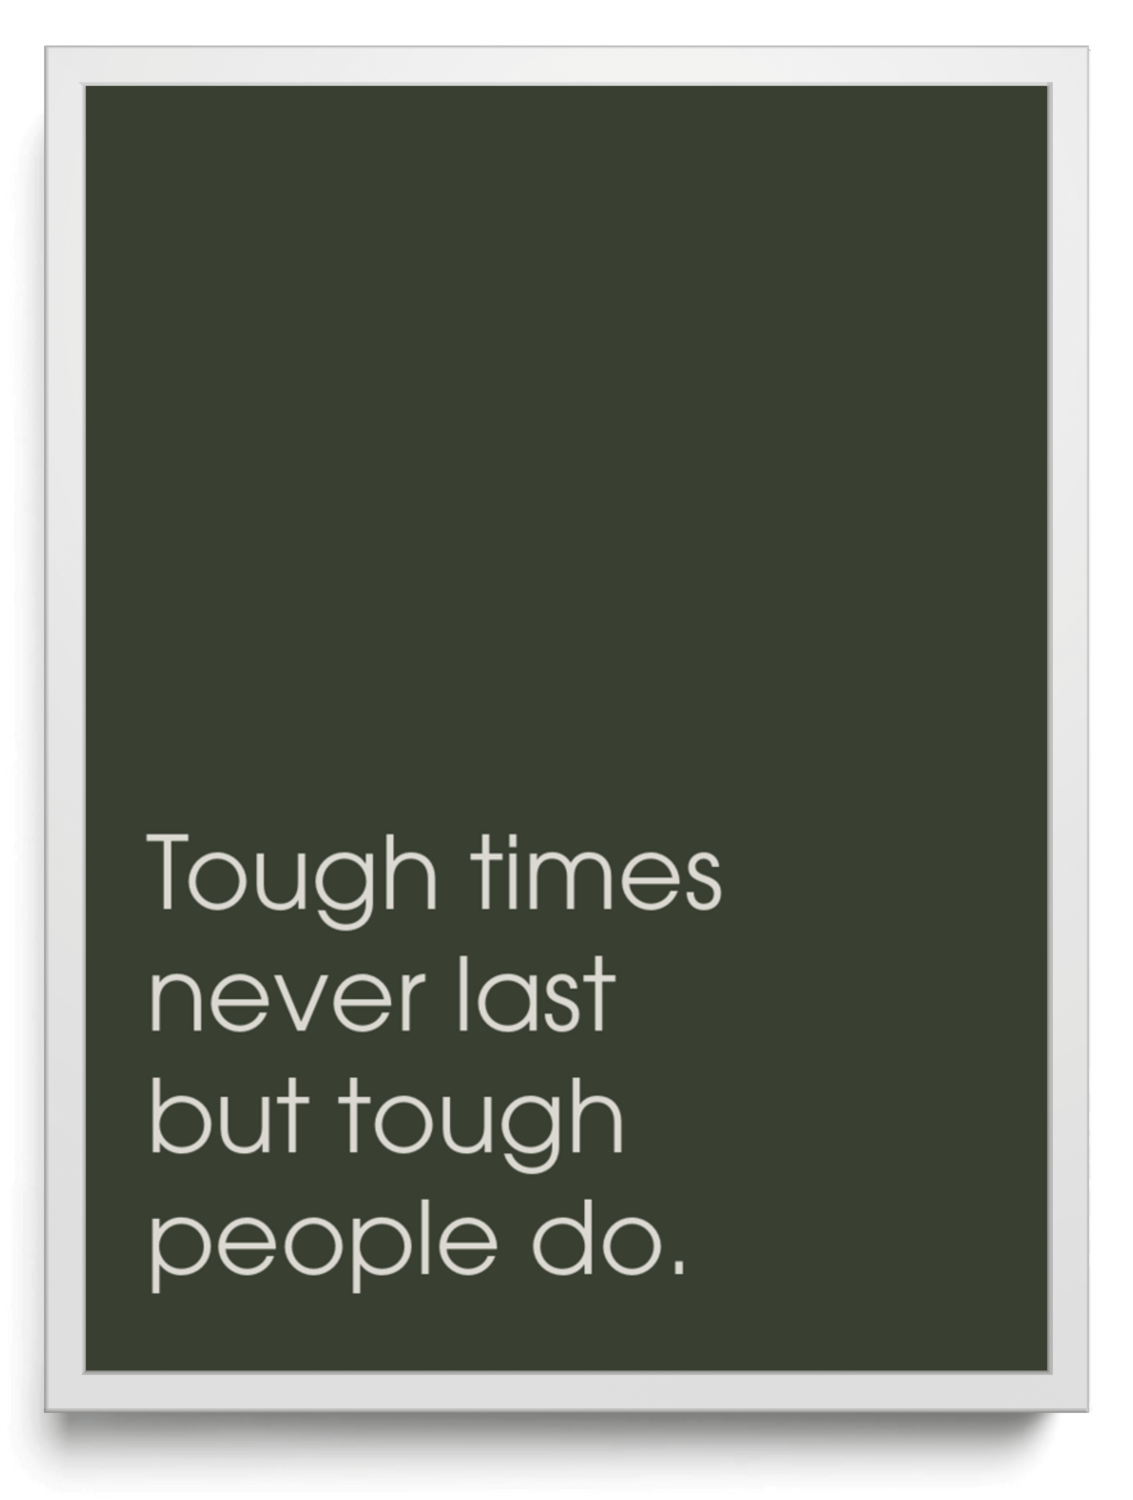 Tough times never last but tough people do framed typographic print